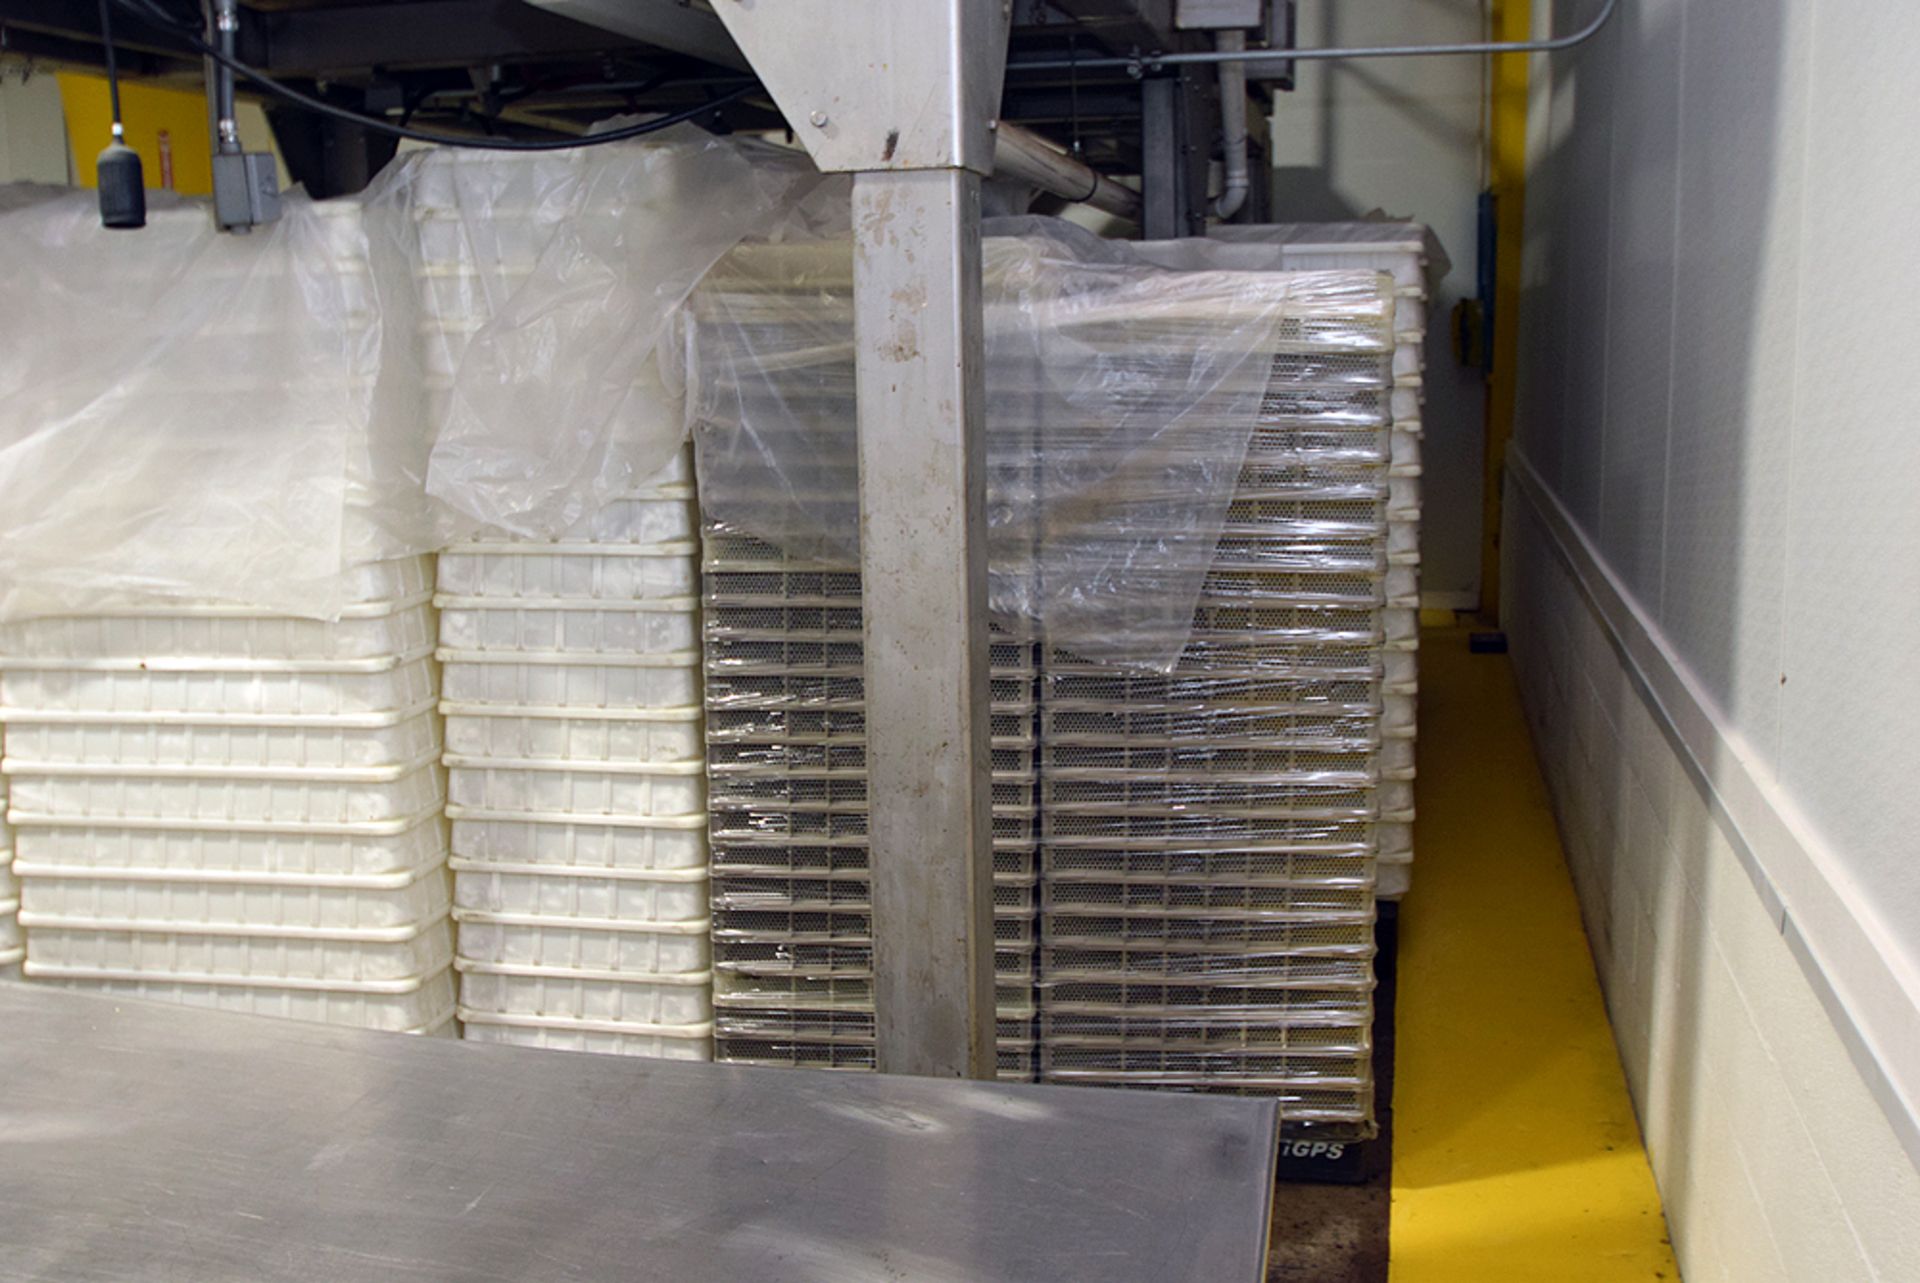 Buckhorn NesTier Perforated Poly Rinse Trays - Image 2 of 2